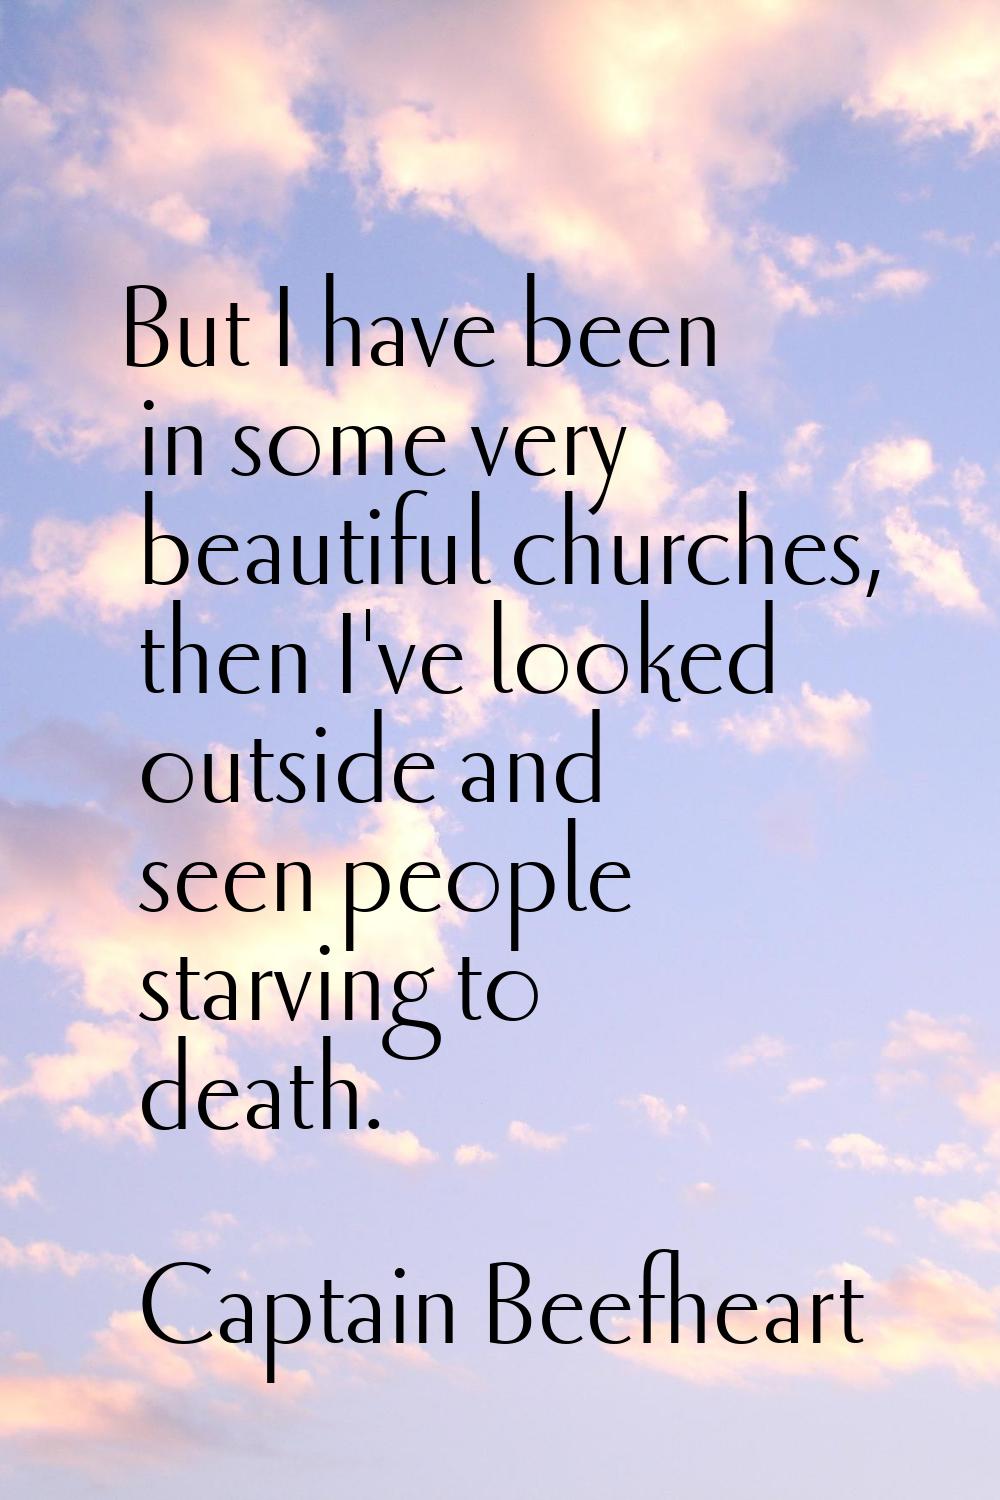 But I have been in some very beautiful churches, then I've looked outside and seen people starving 